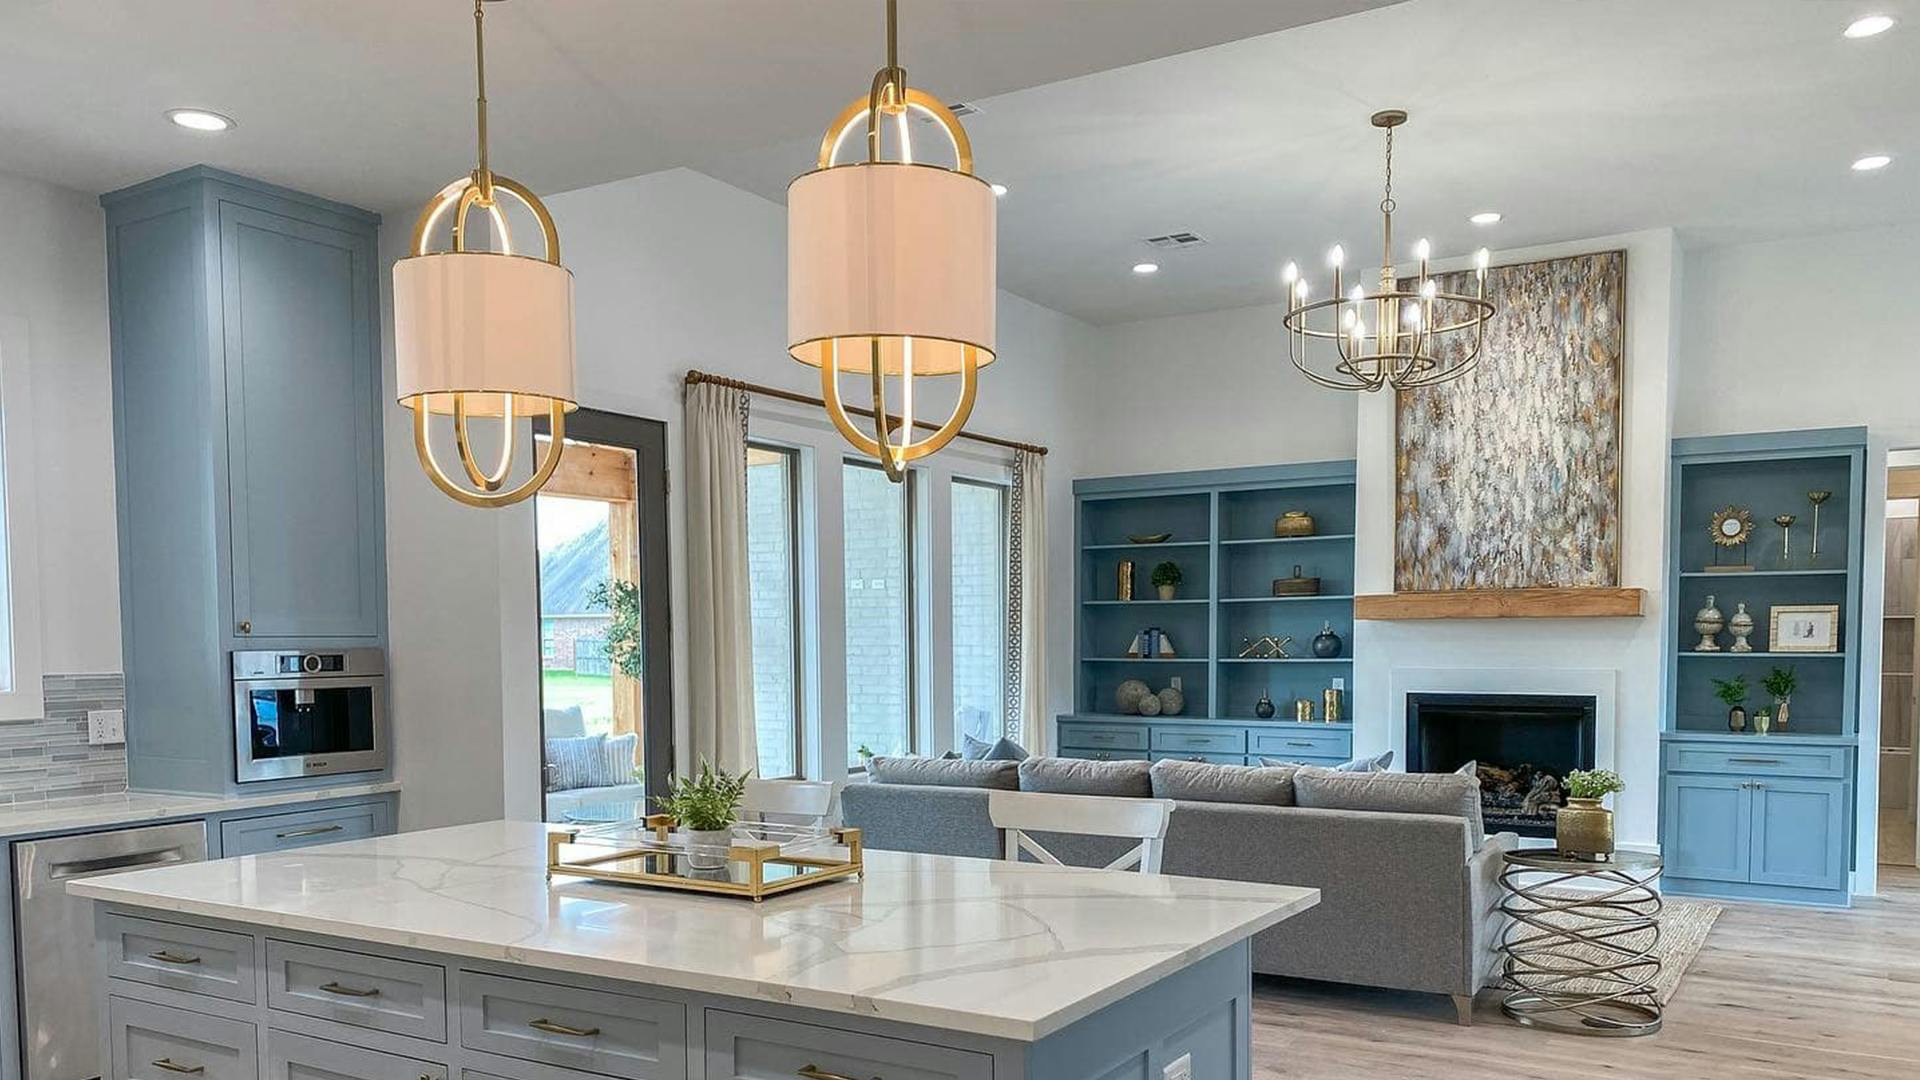 Kitchen and Living room filled with Kichler lights for St. Jude Dream Home Giveaway